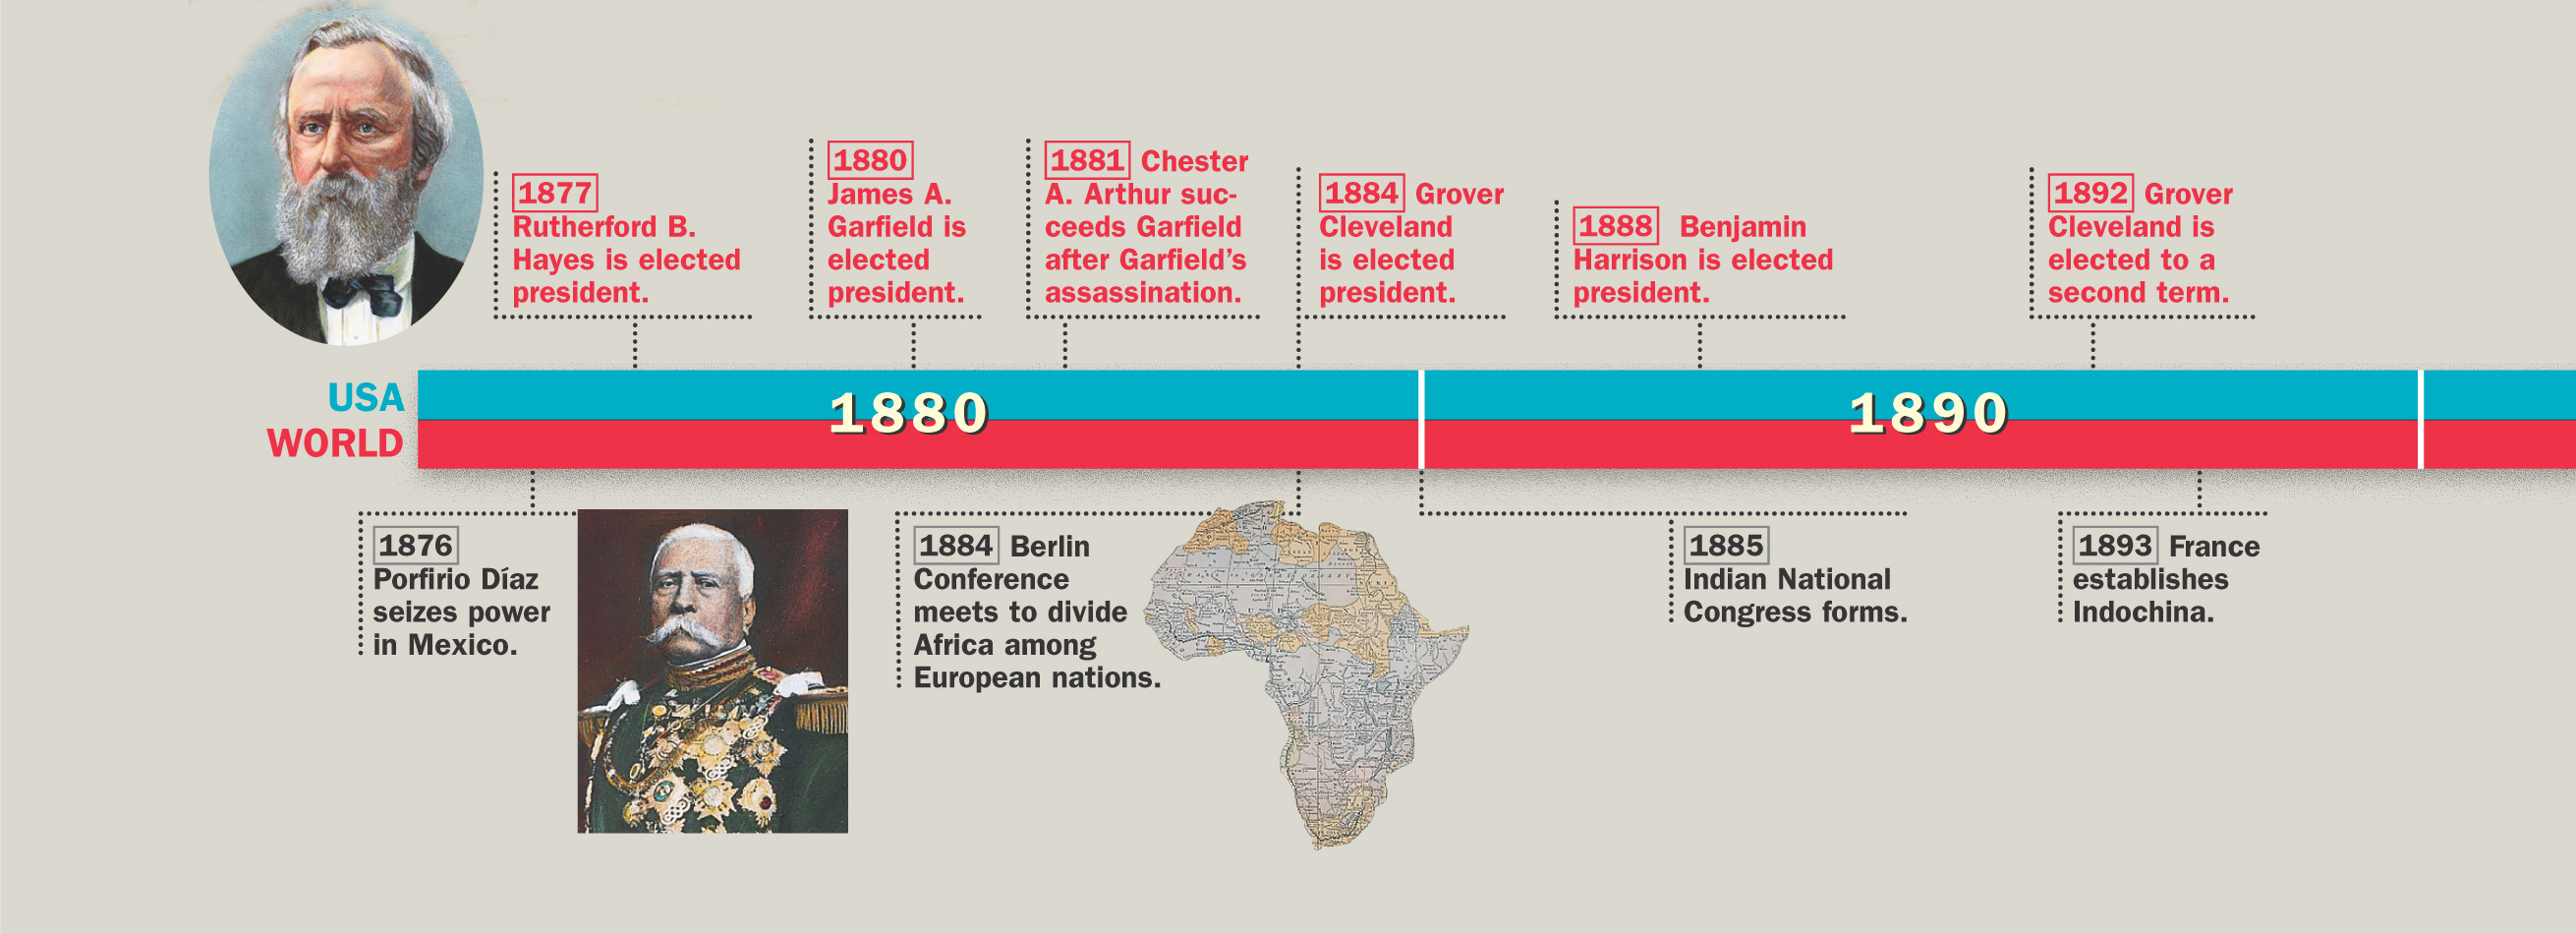 A timeline of historical events from 1876 to 1914 in both the U.S. and the world